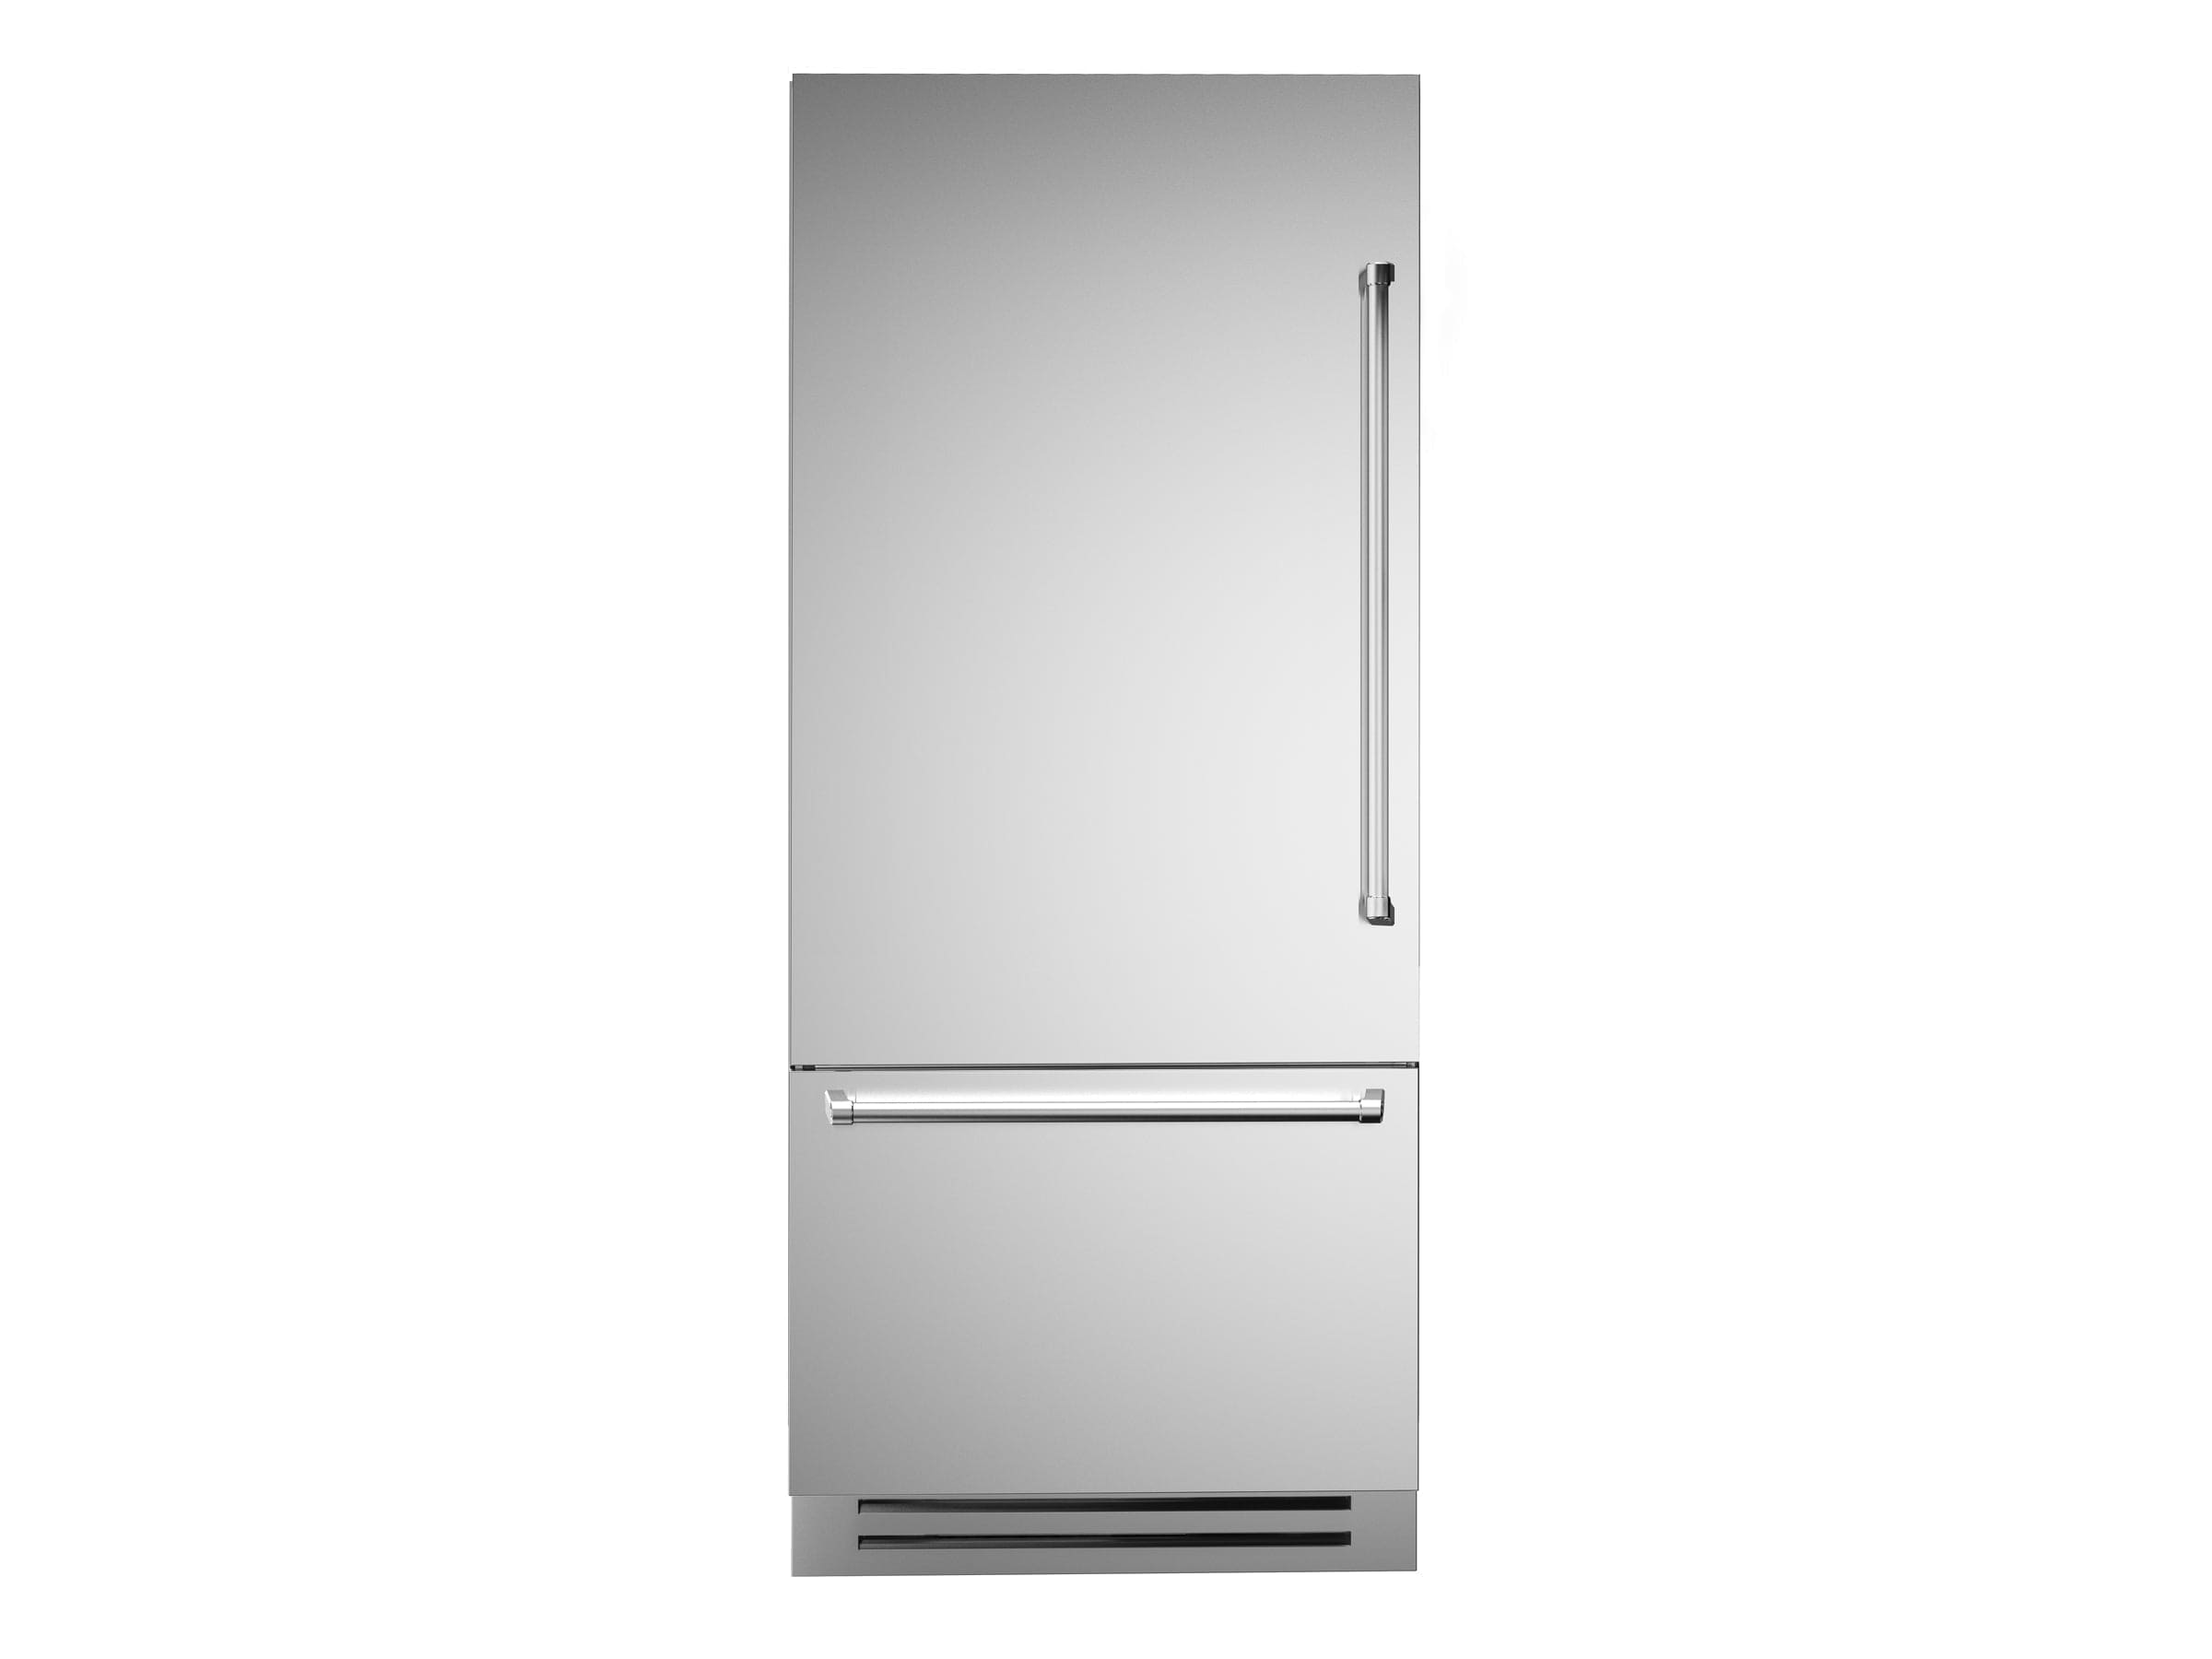 Bertazzoni 36" 19.6 Cu.Ft. Stainless Steel Built-In Bottom Mount Refrigerator With Ice Maker and Left Swing Door REF36BMBIXLT Luxury Appliances Direct